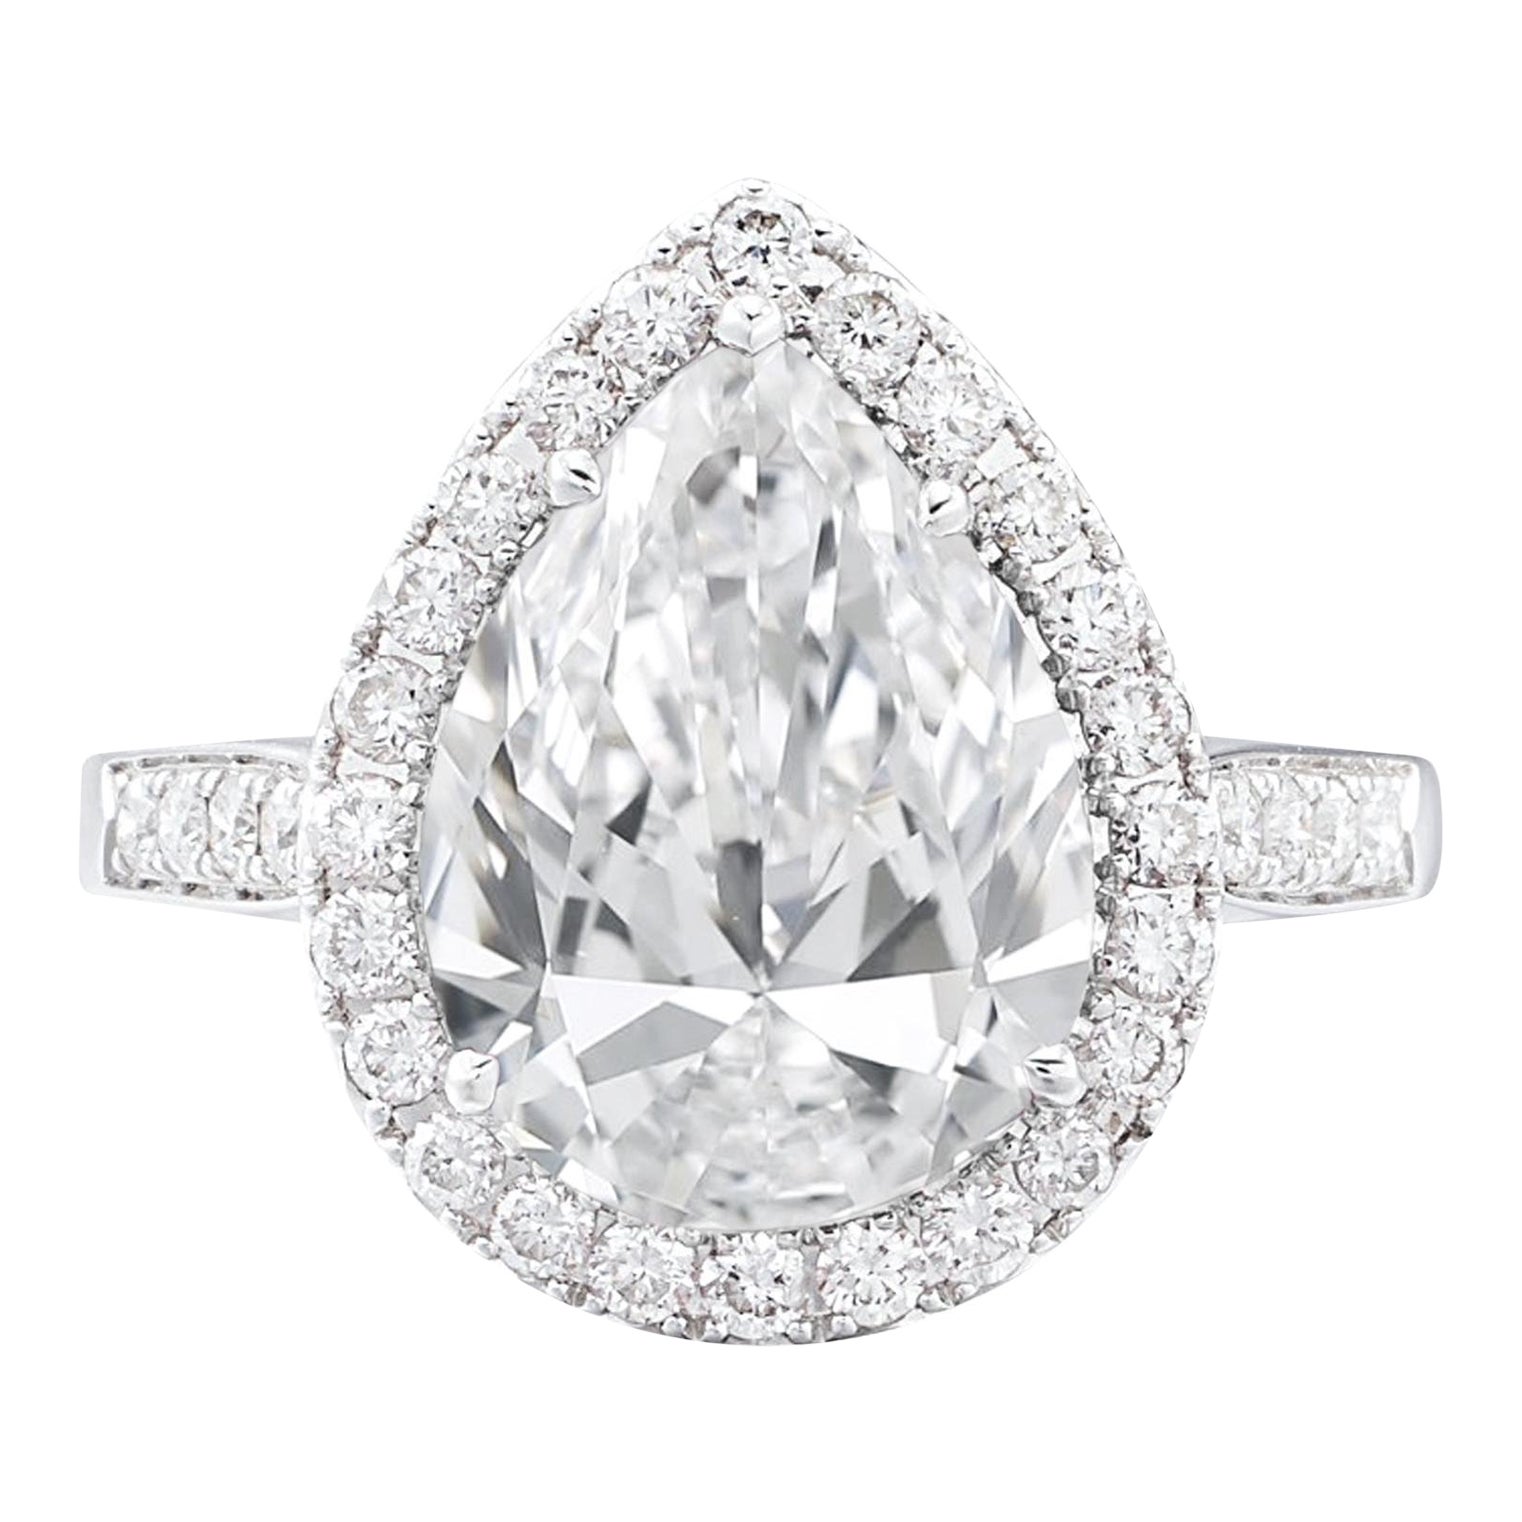 D COLOR IF GIA Certified 5.36 Carat Pear Cut Diamond Halo Pave Ring For Sale